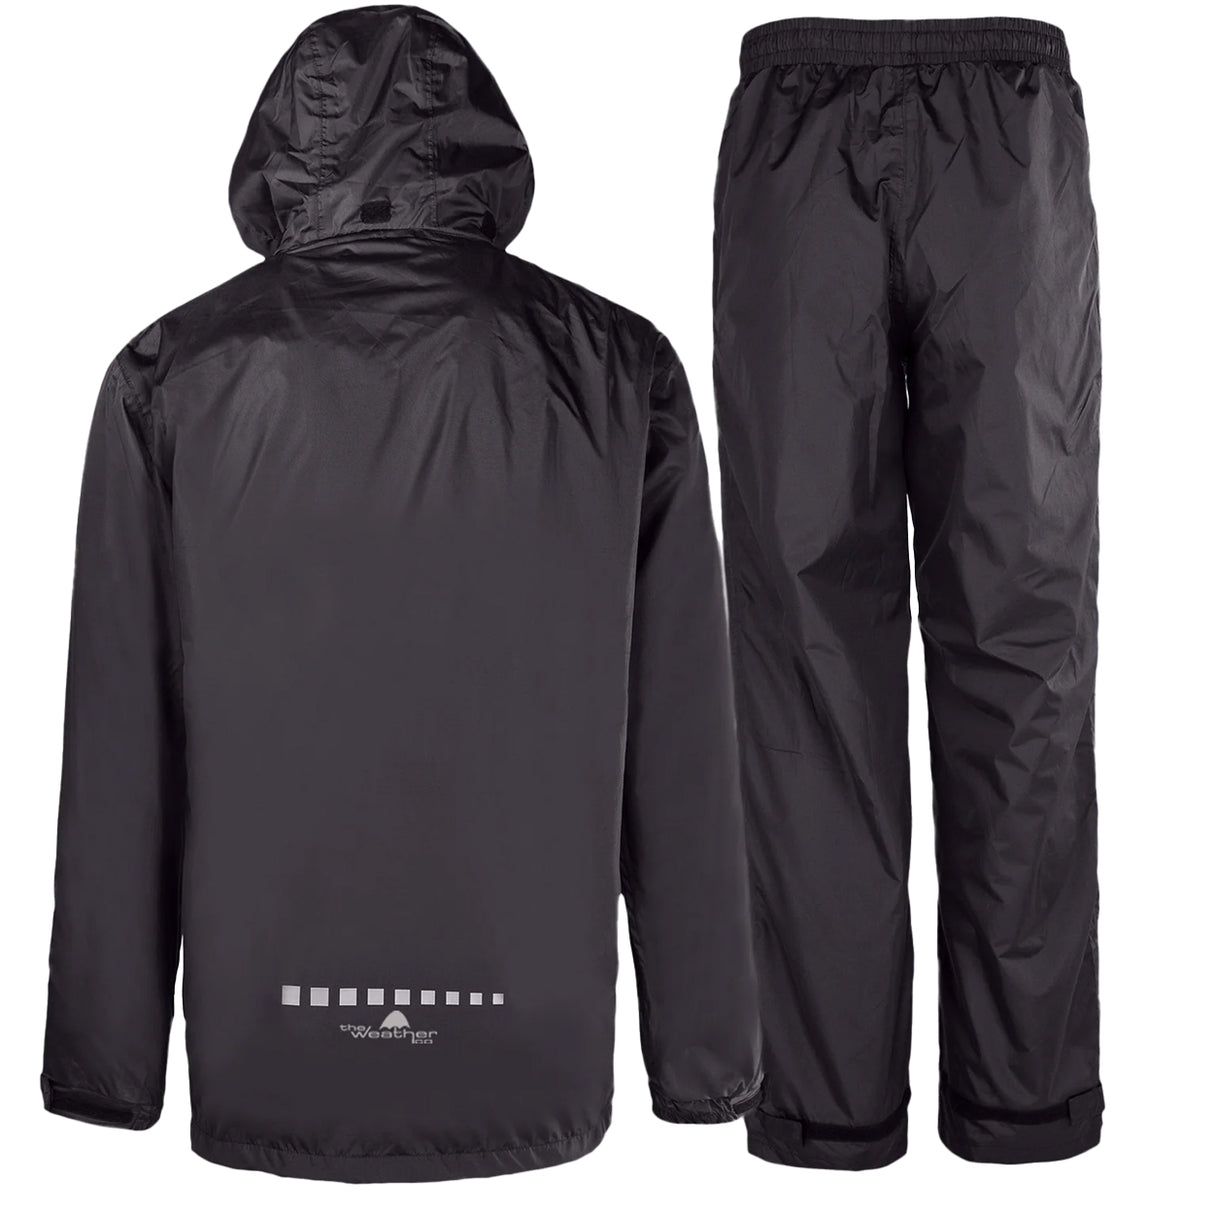 The Weather Company Waterproof Hooded Golf Rain Suit